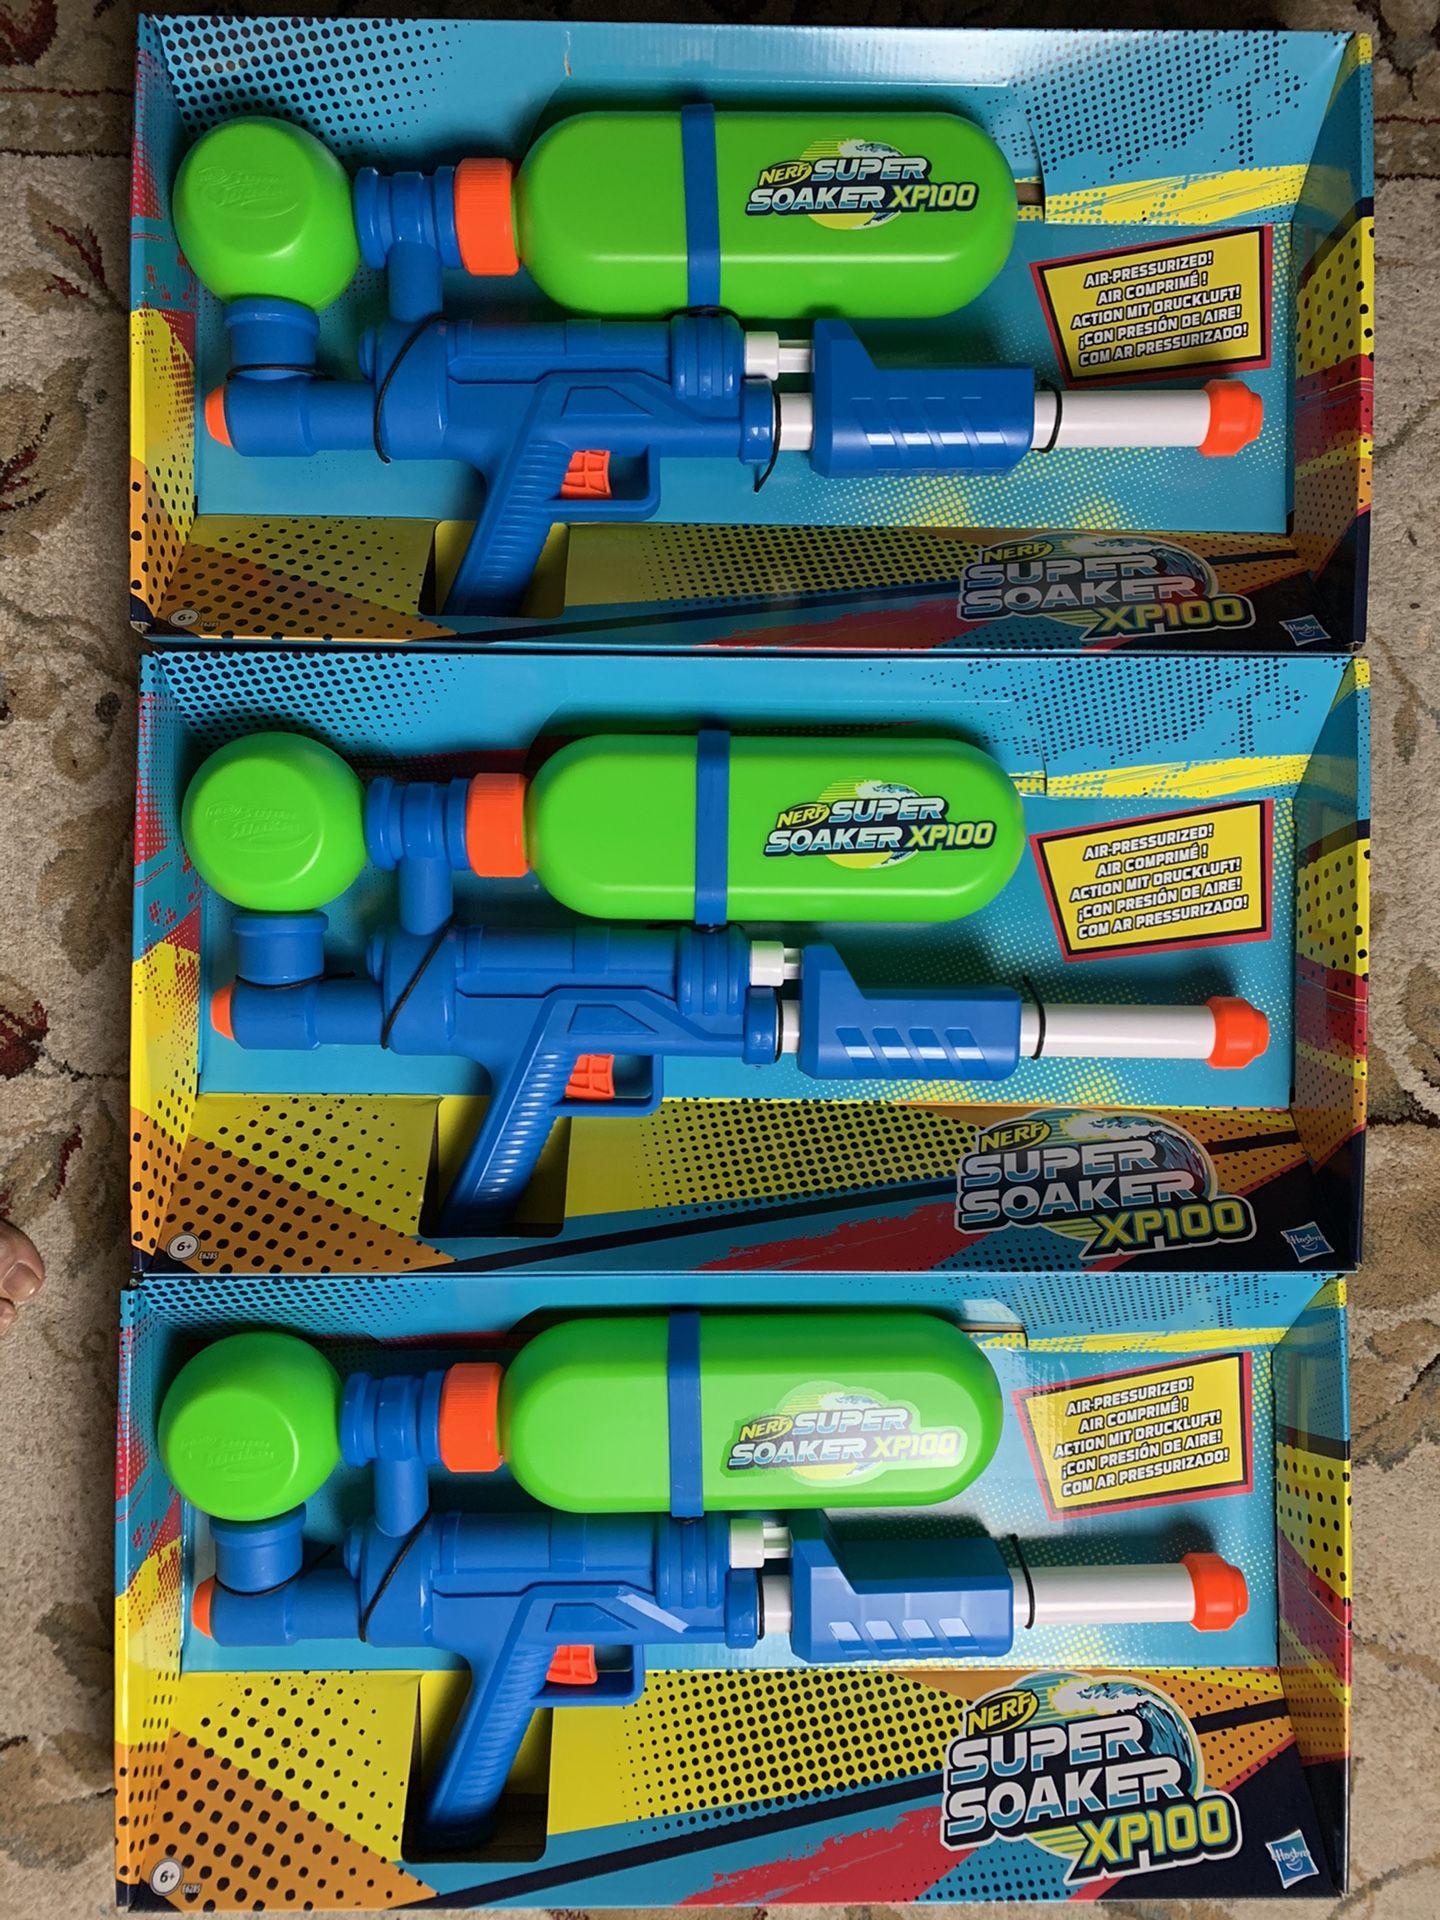 Super Soaker XP 100 Water Gun Limited Edition Brand New 2020 Nerf IN HAND